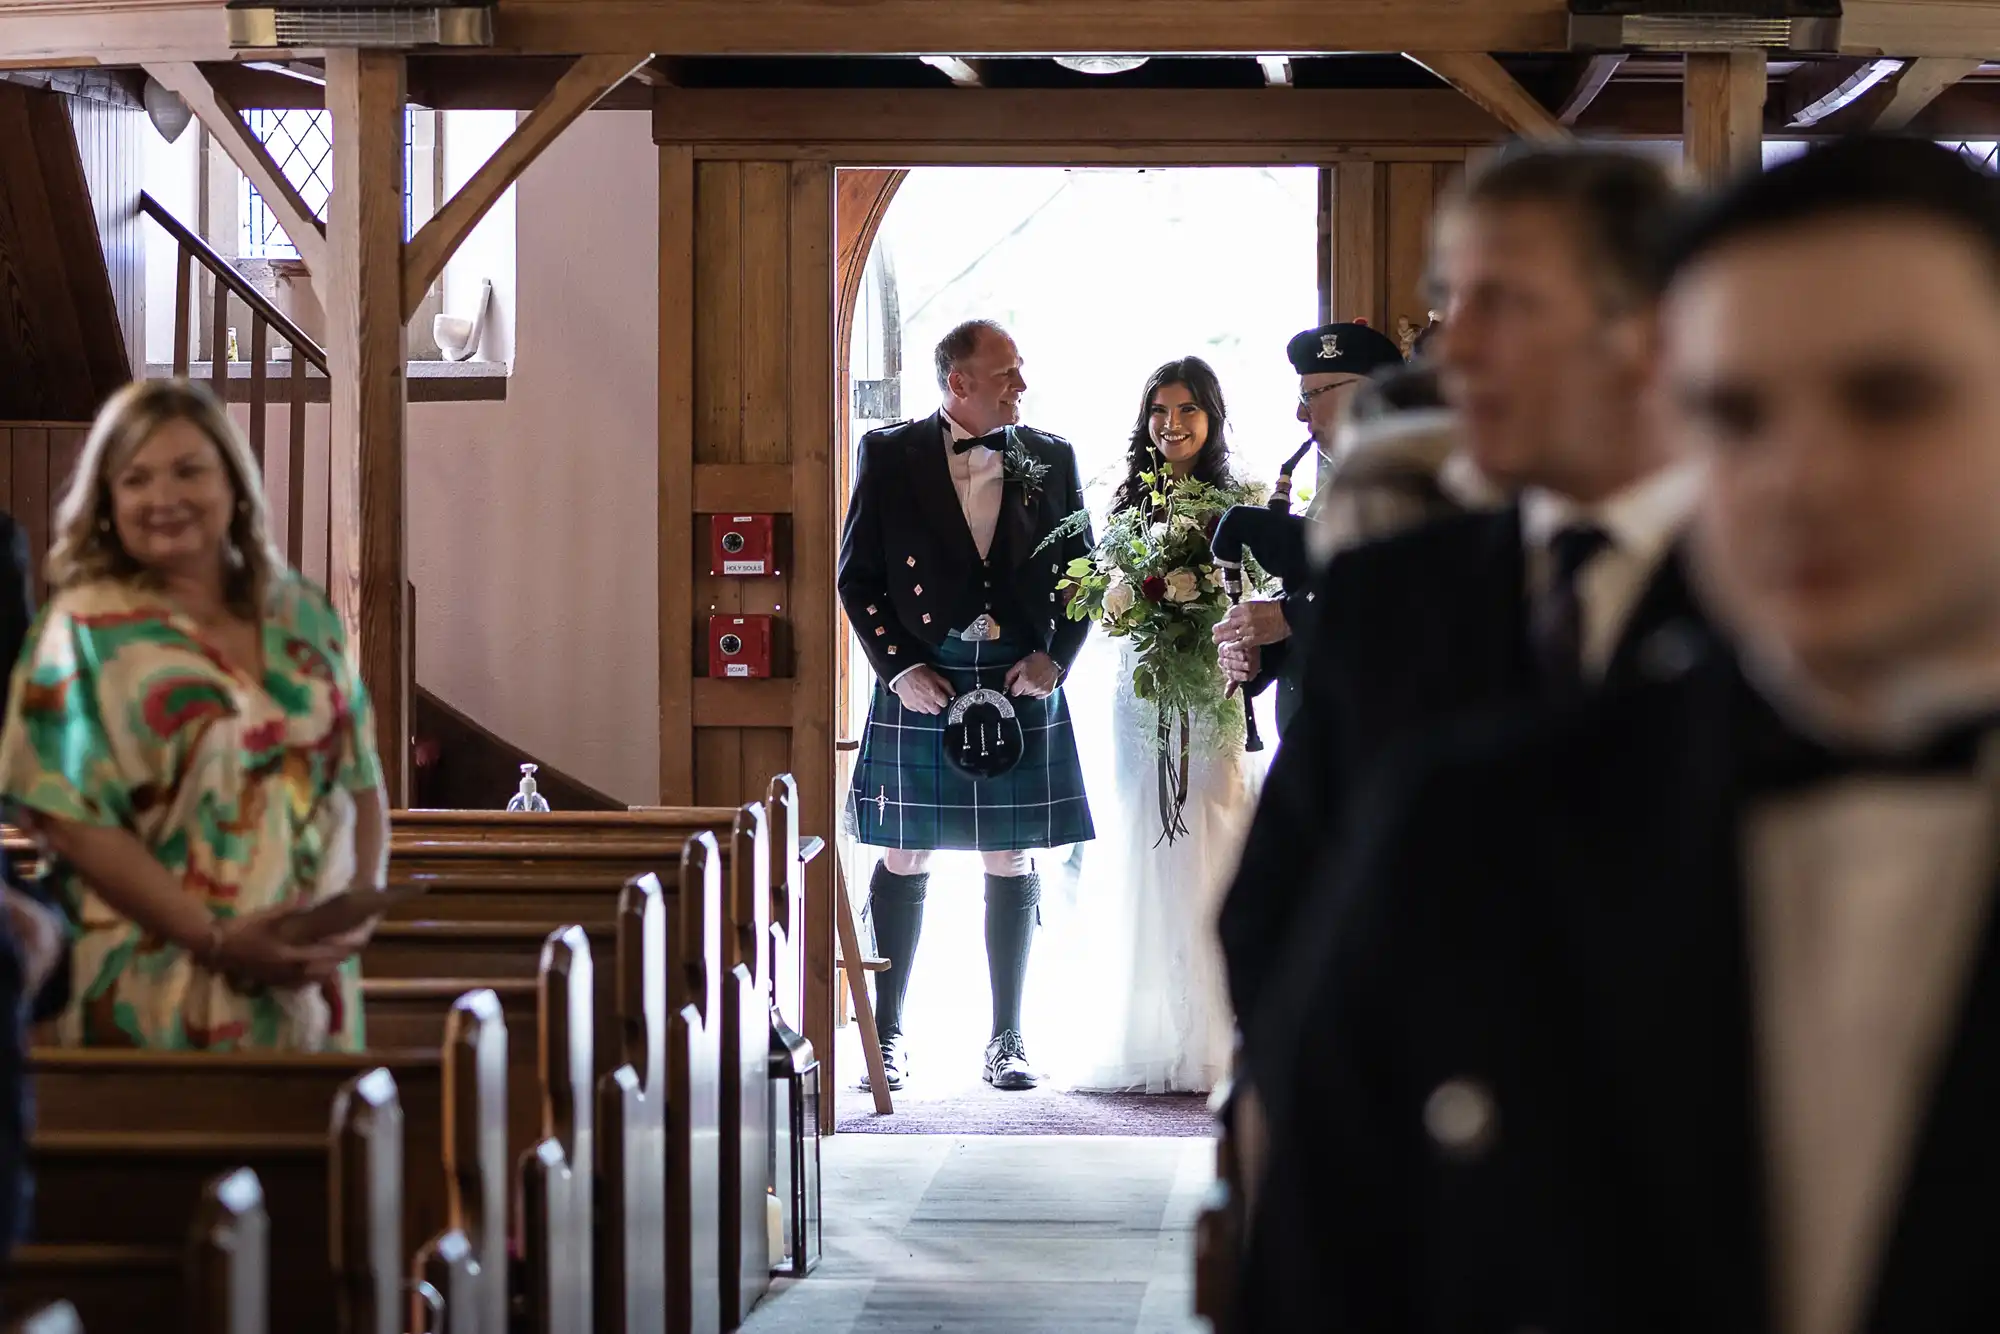 Bride and father in Scottish attire entering a church, viewed between rows of guests.